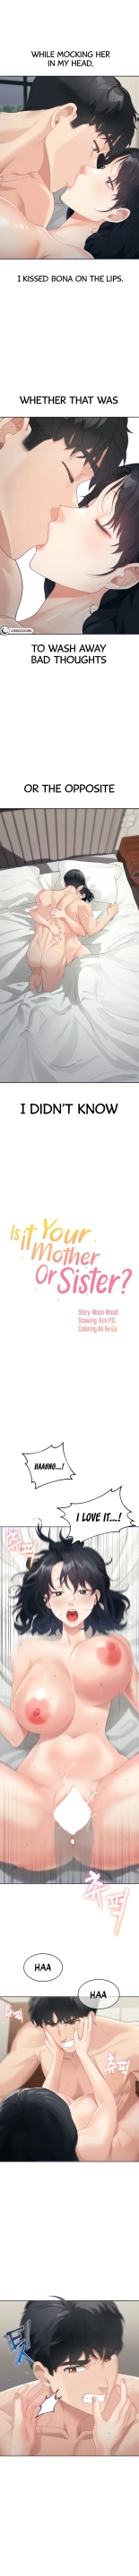 Is It Your Mother or Sister? : page 55